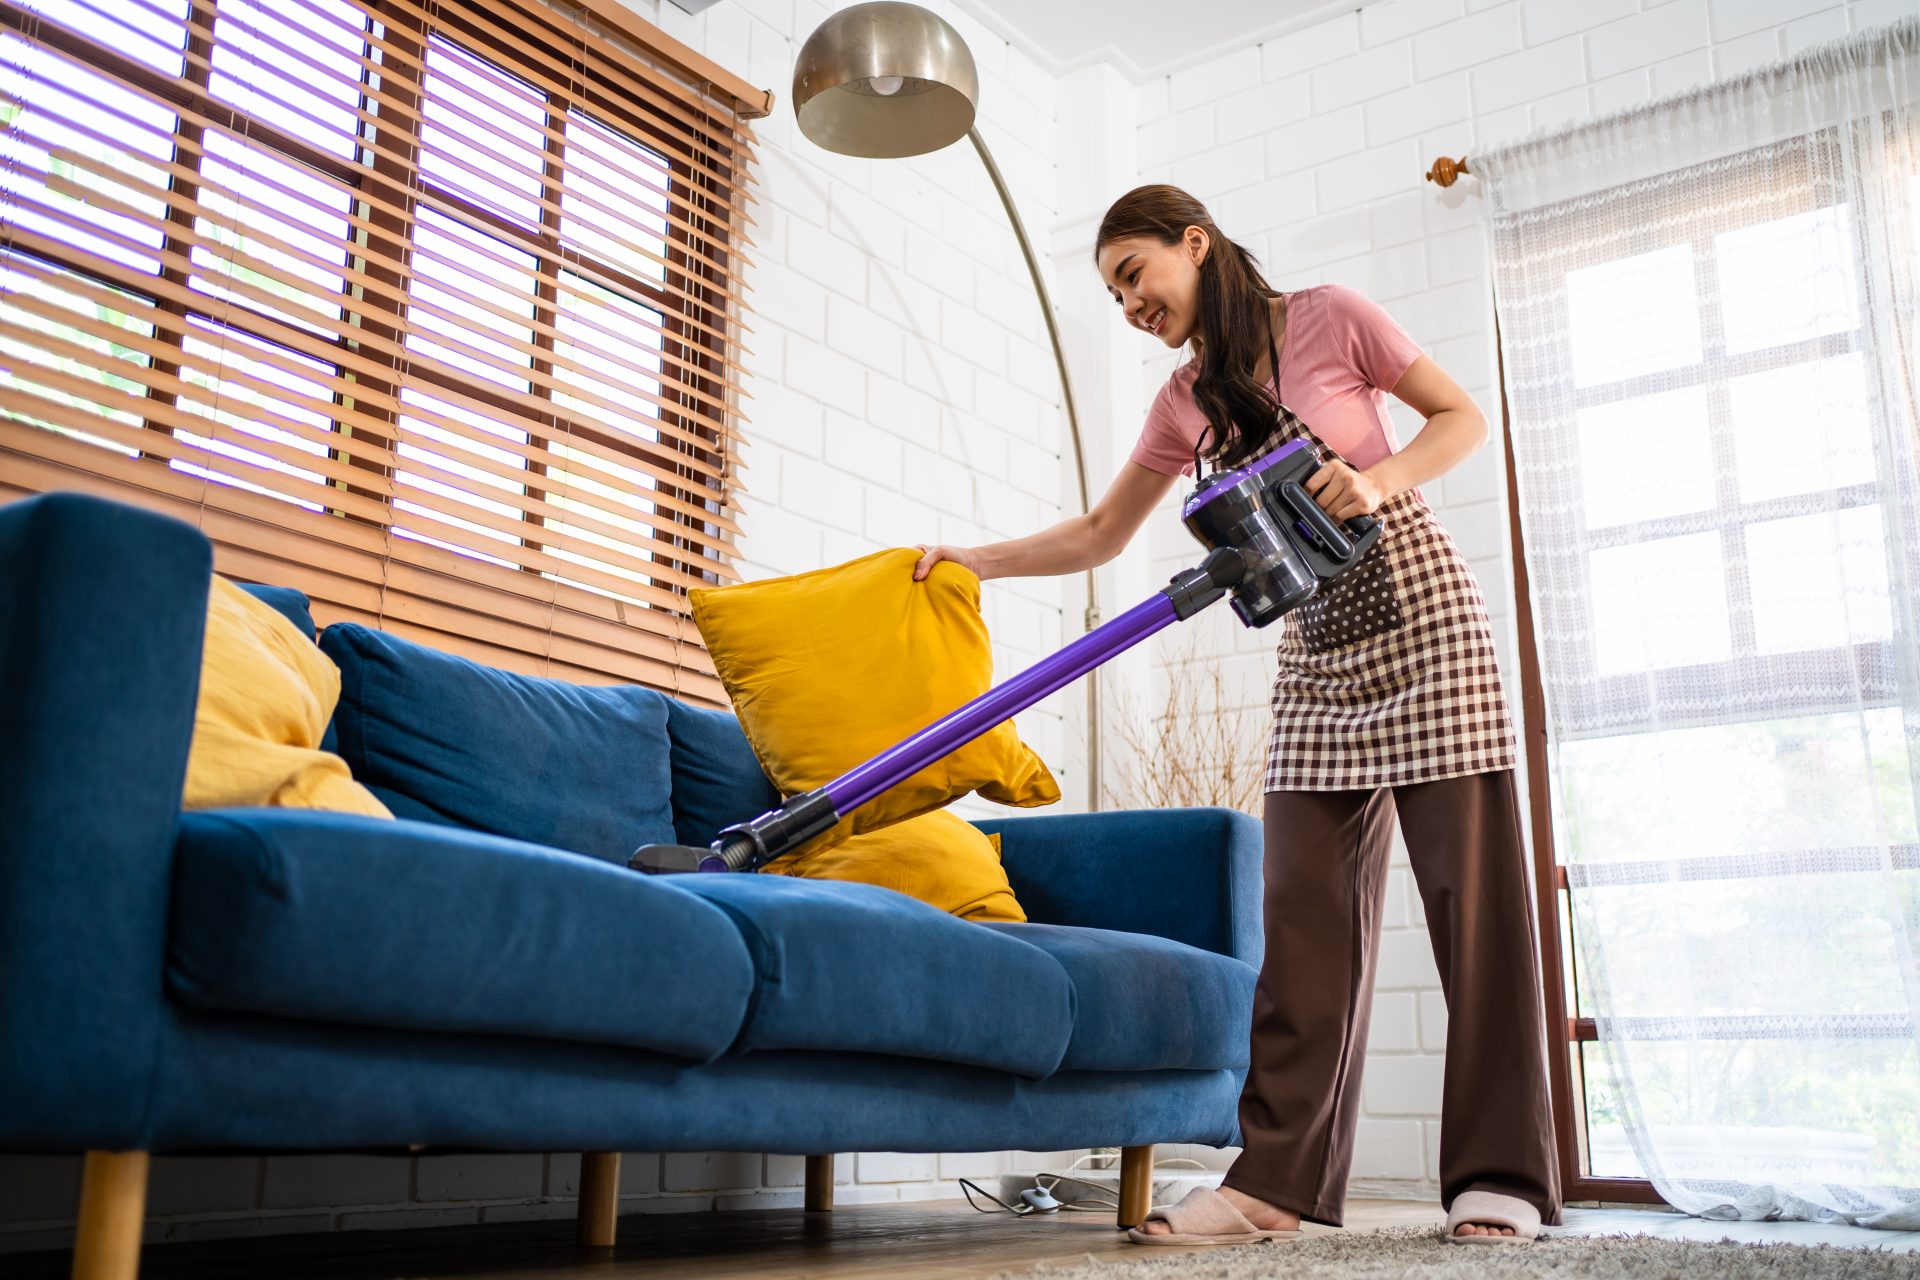 Does Cleaning Your House Count as Exercise?